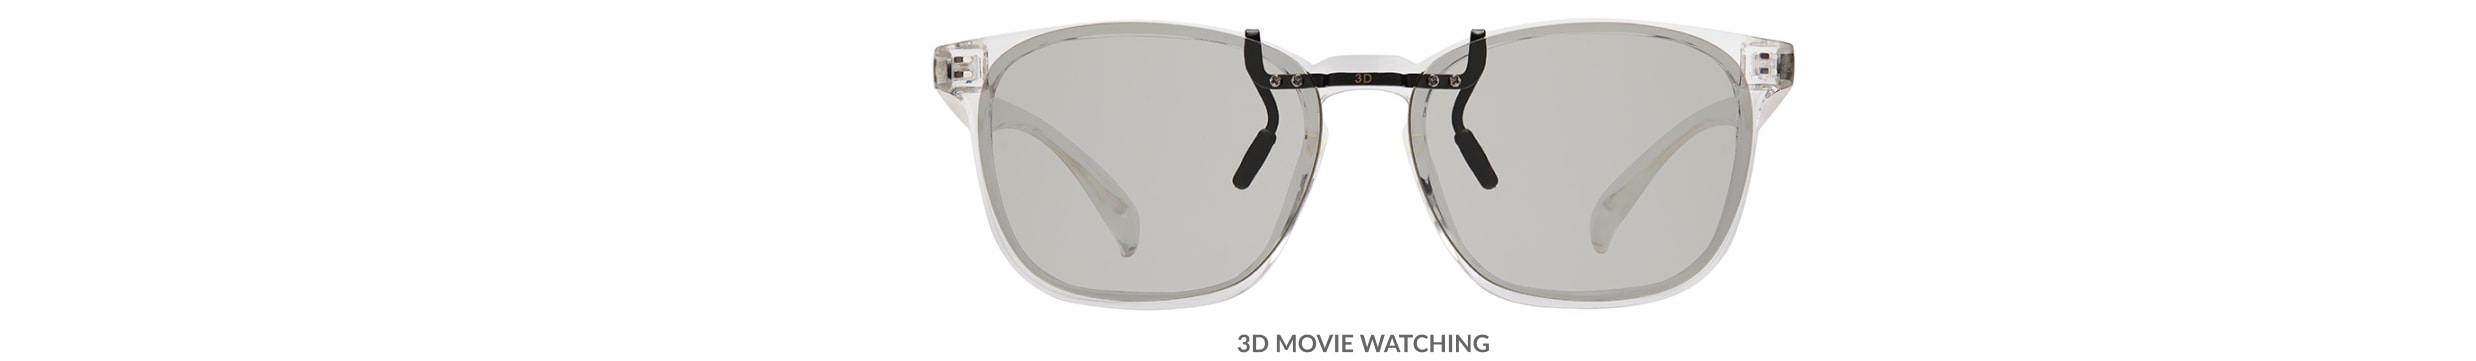 Custom clip-ons. Our polarized custom clip-ons reduce glare and are available for almost any frame. Each clip-on is specially cut to fit the frame with prices starting at just $4.95  (Compare to $50). Zenni square glasses #2020123 in clear, shown with 3D movie watching custom clip-on.